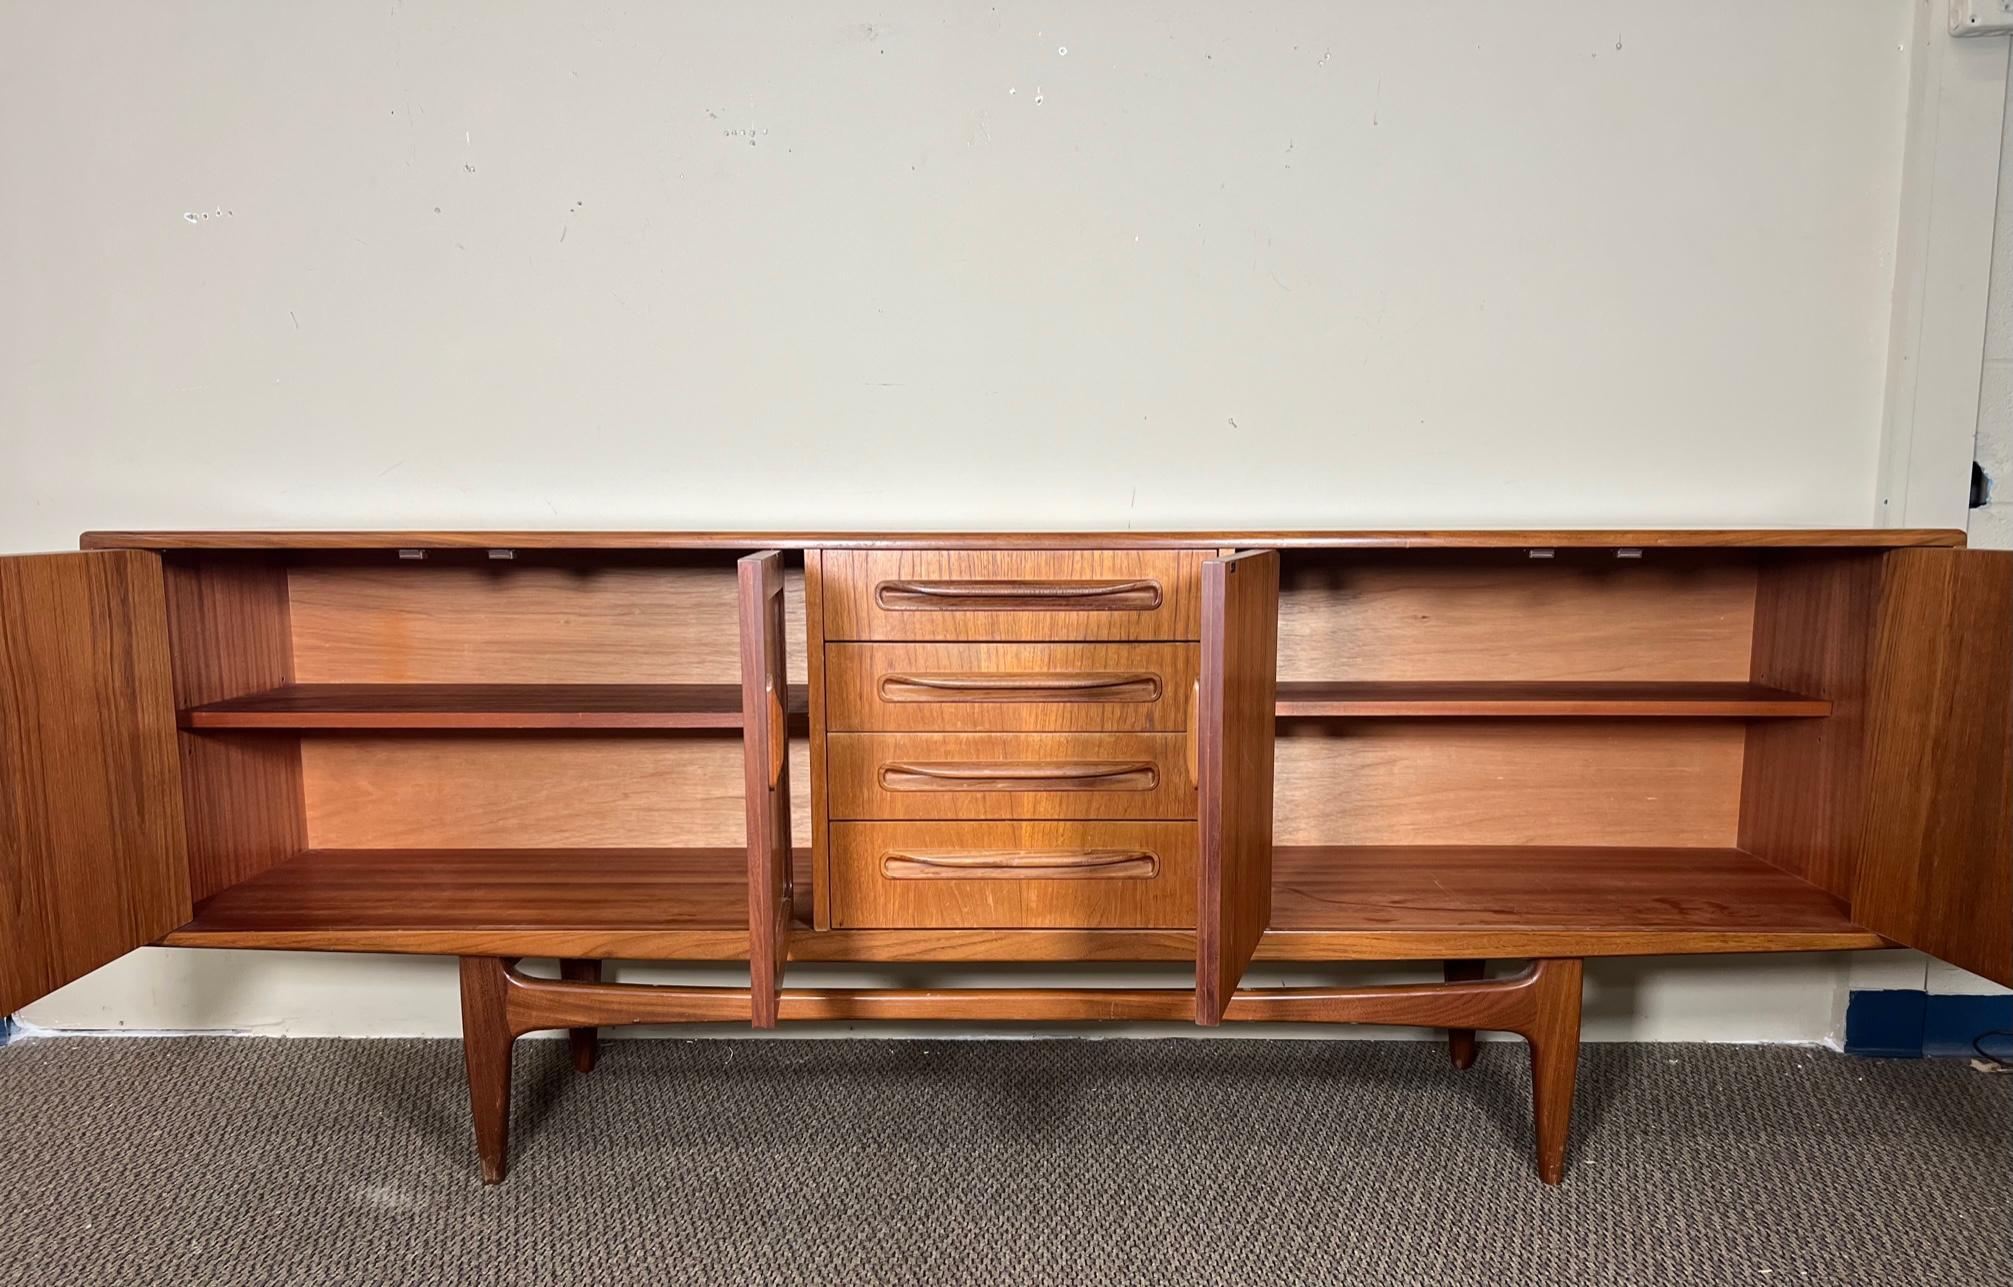 Outstanding teak credenza by G Plan with original gray fabric with silverware dividers in the top drawer. Adjustable shelves. Very good condition. Drawers all open and close well. Some scratches inside drawers. Ring mark in right cabinet. Minor